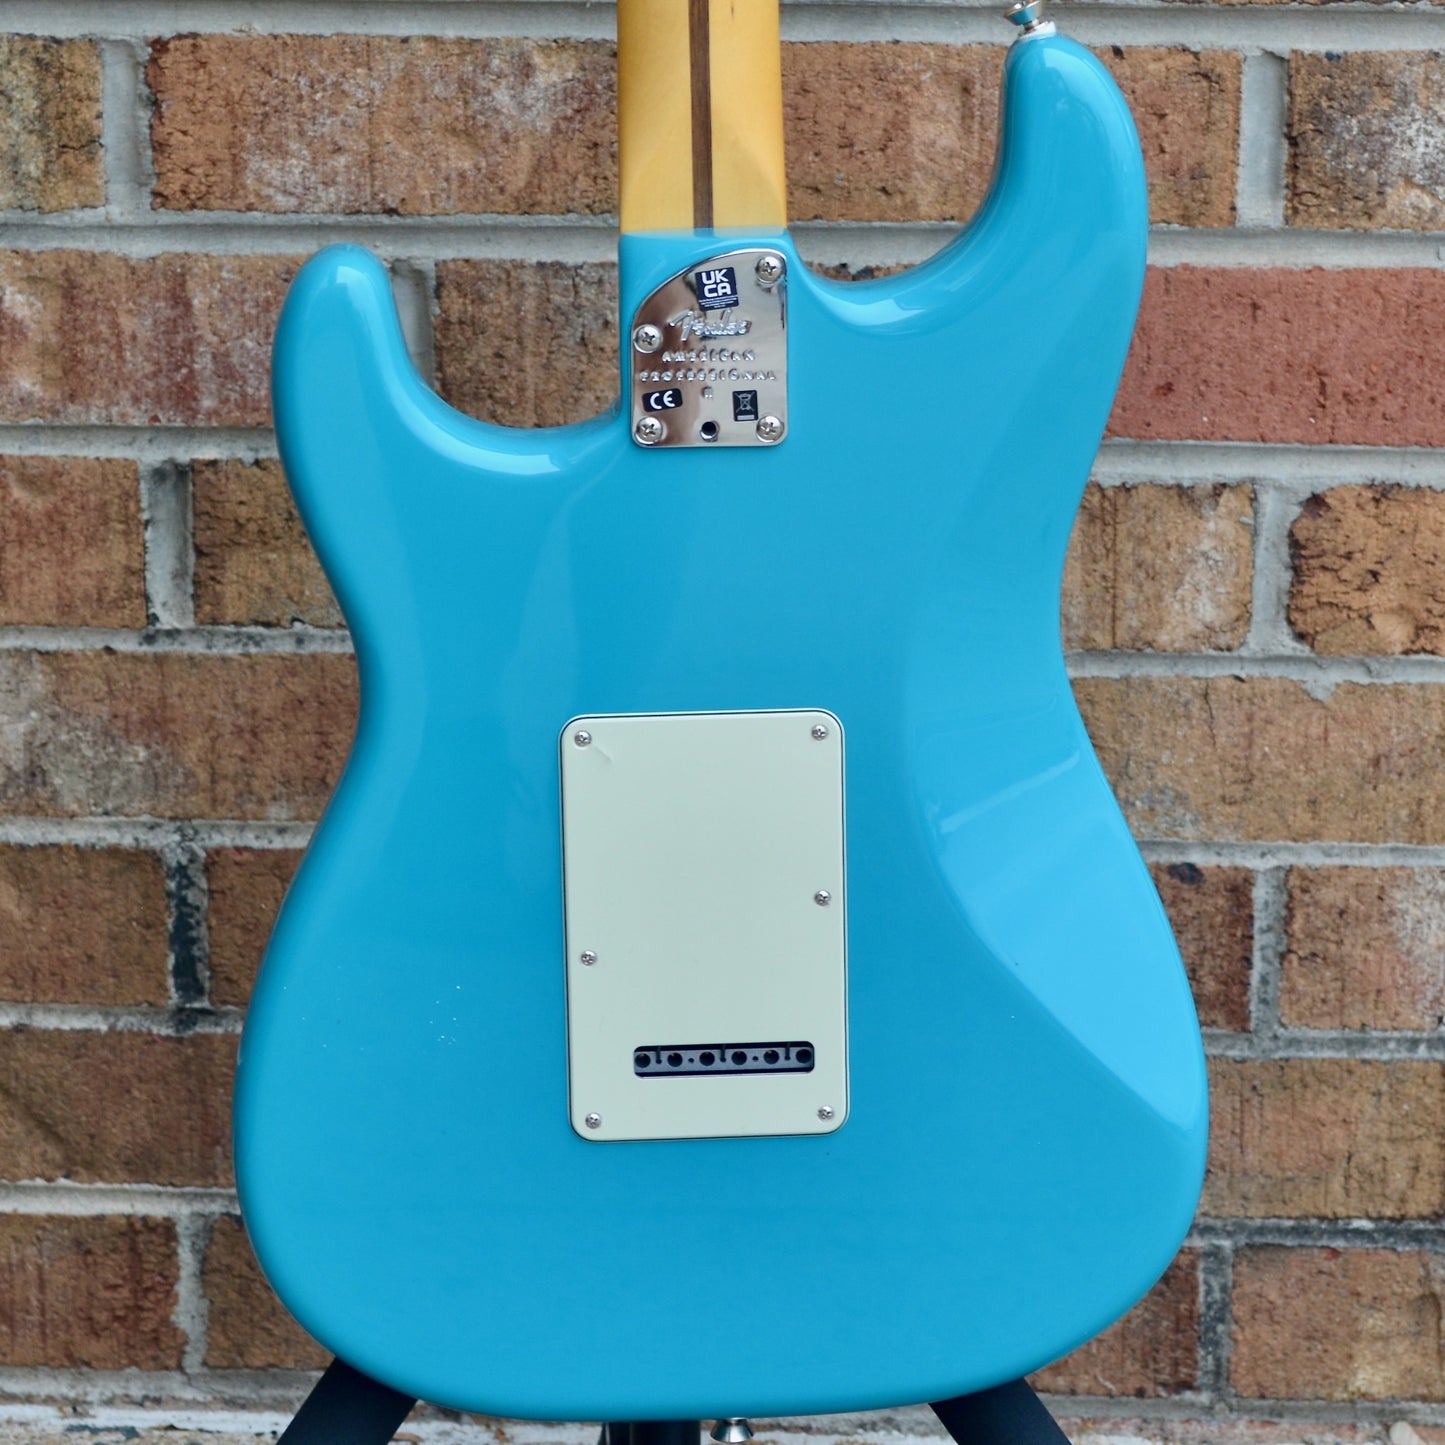 Fender American Professional II Stratocaster®, Rosewood Fingerboard, Miami Blue